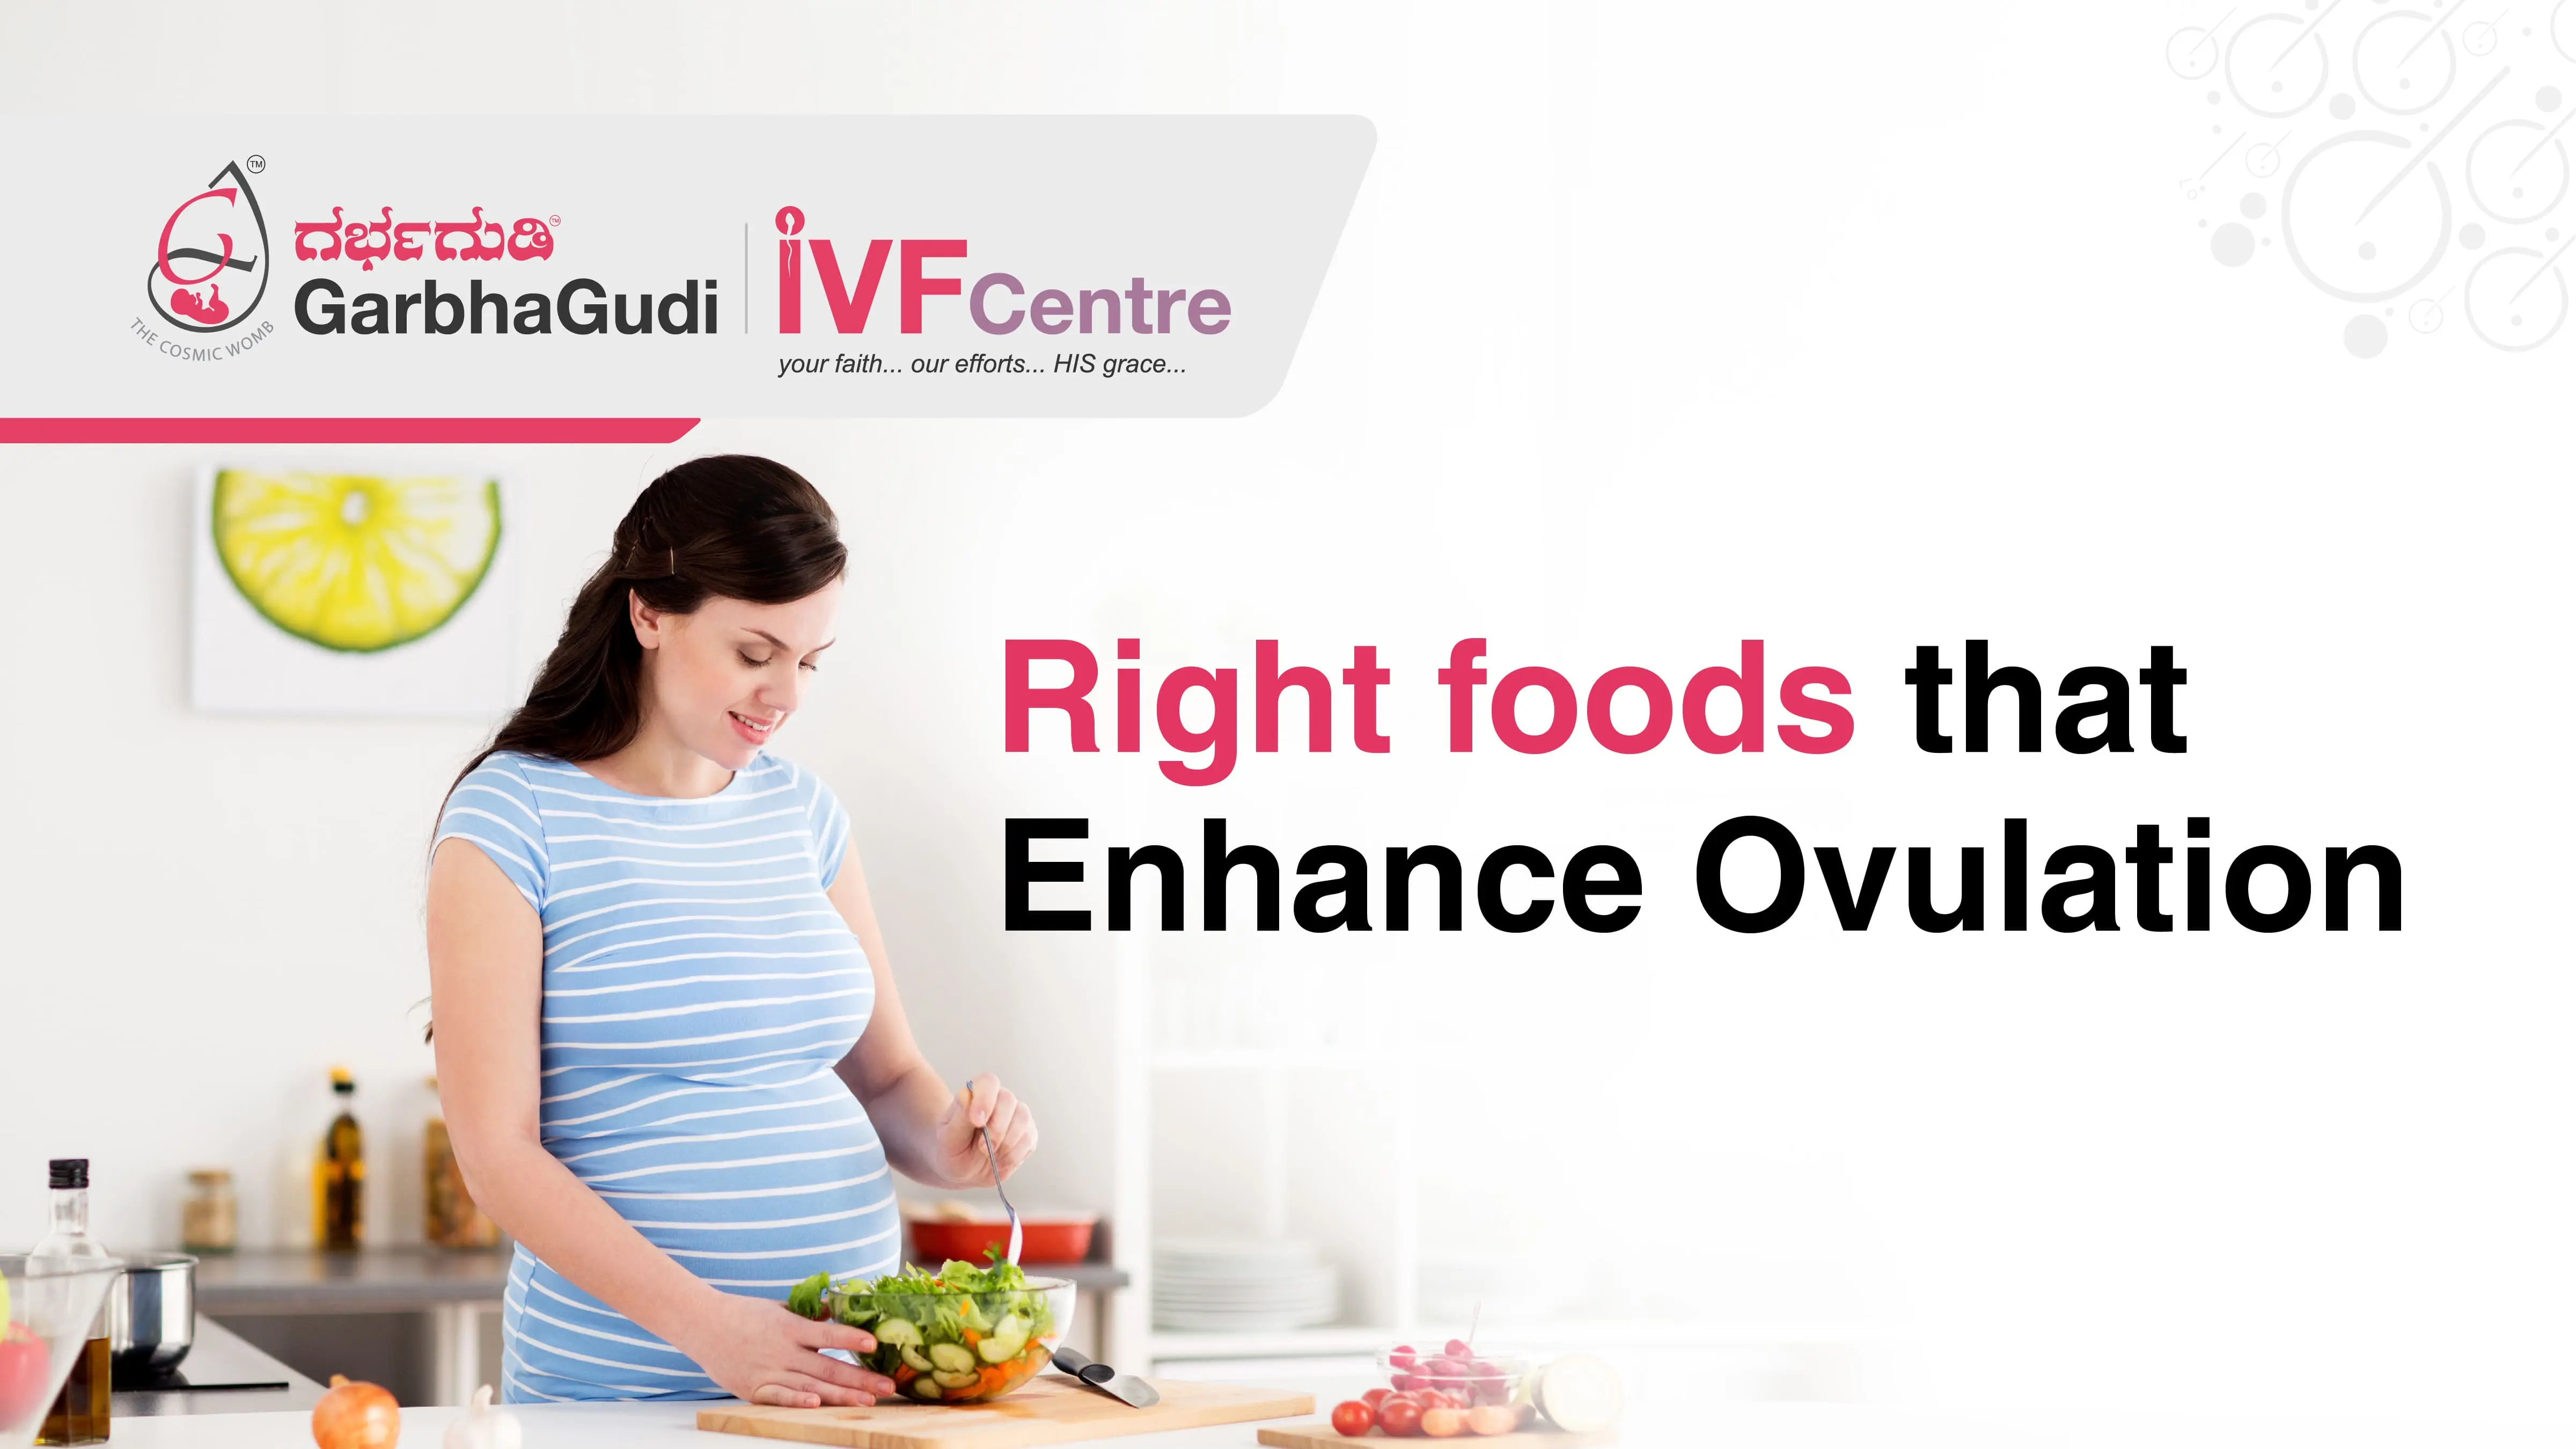 Right foods that Enhance Ovulation